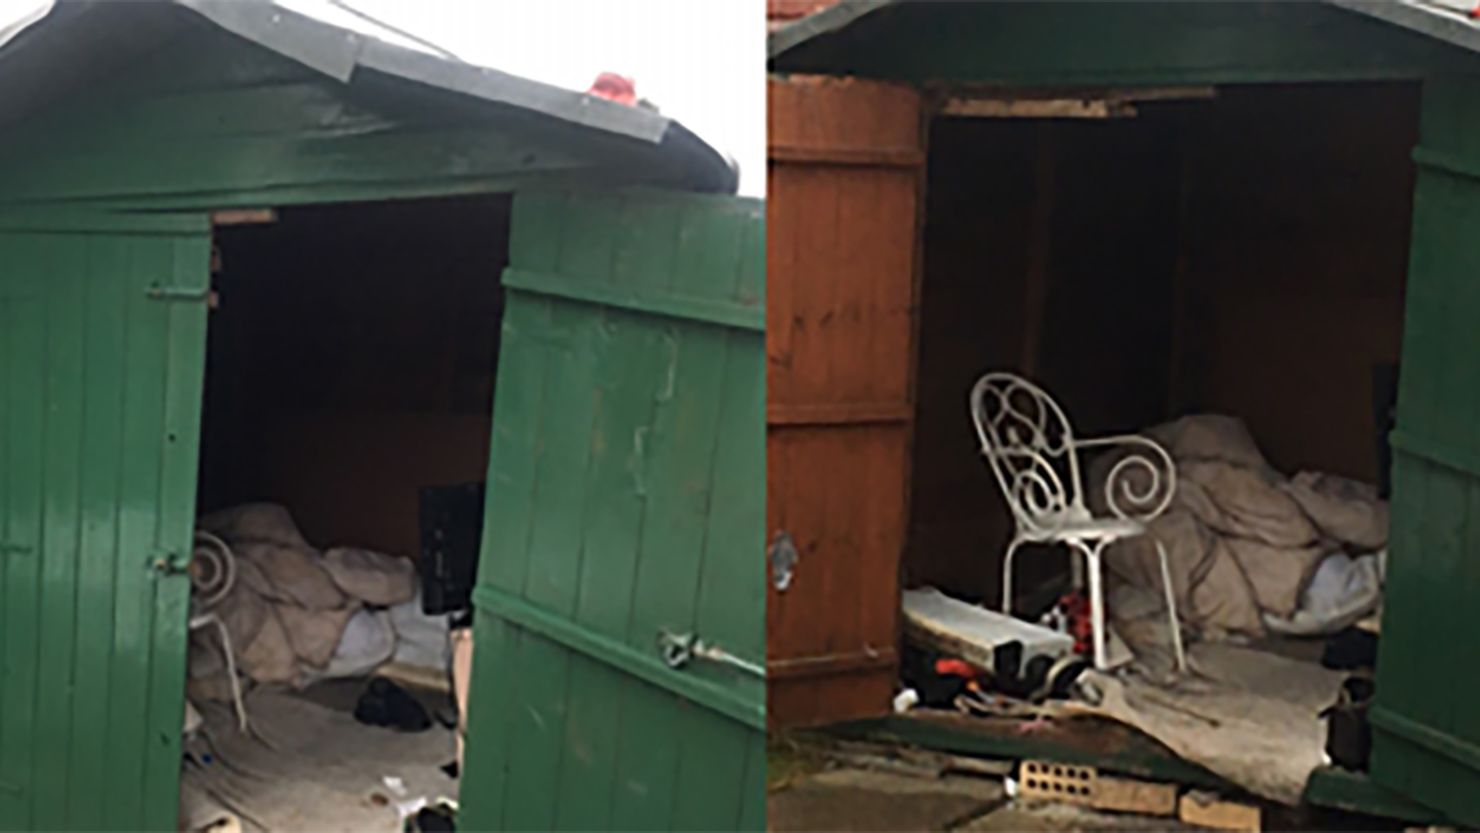 UK officials released this photo of the shed where the man is believed to have lived.